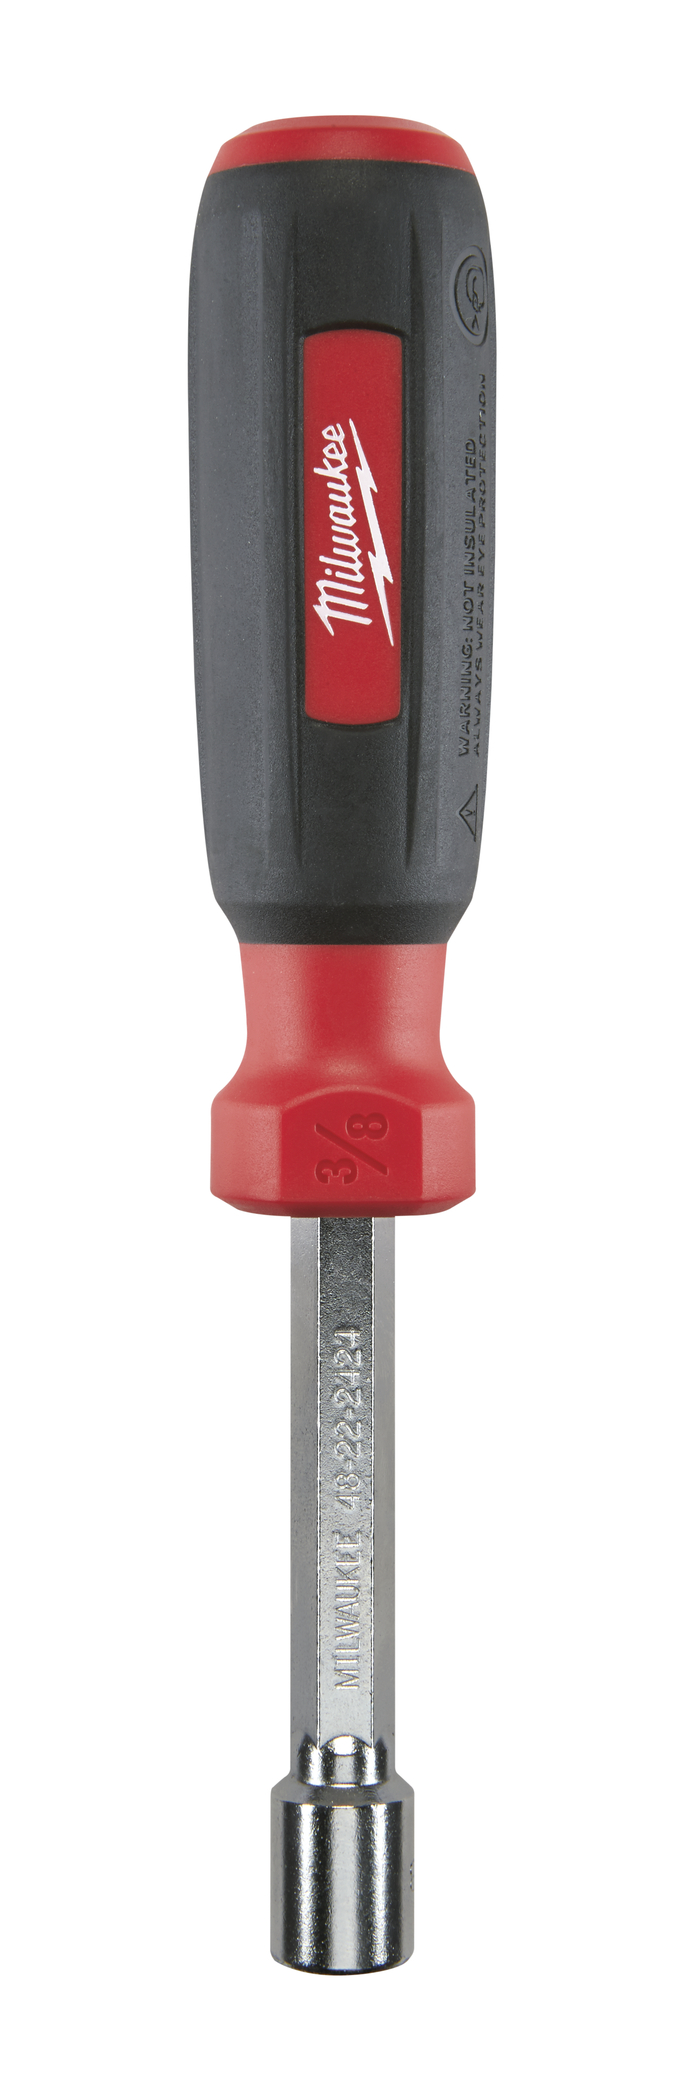 3/8 in. Hollow Shaft Nut Driver